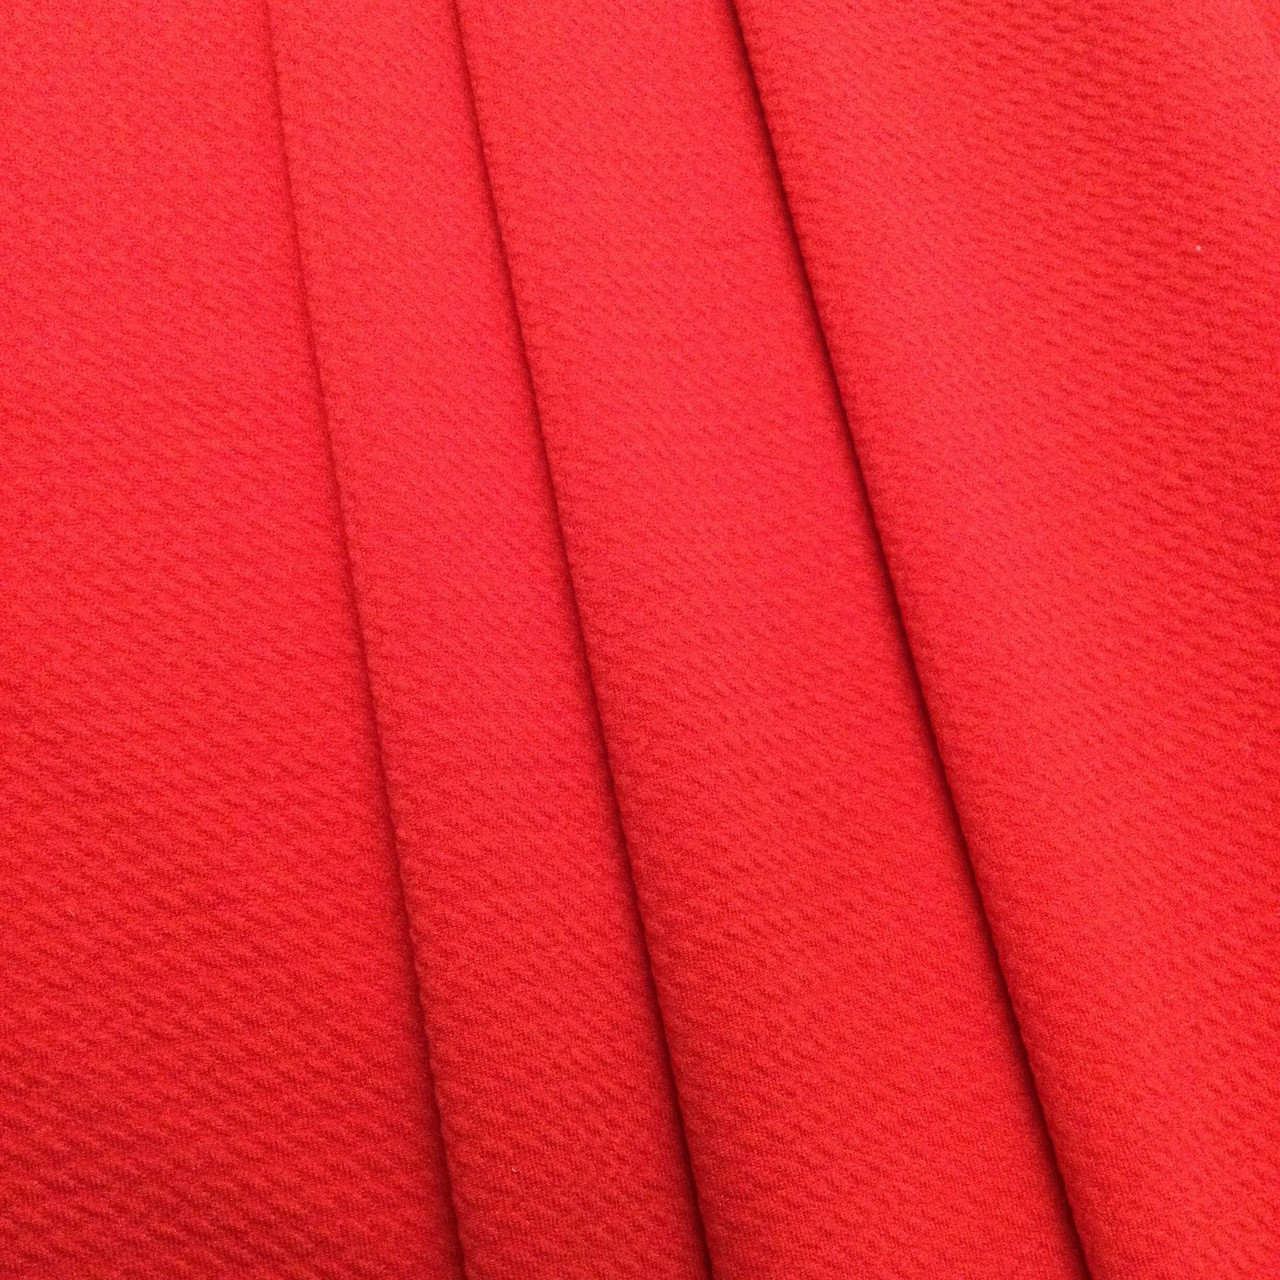 Deep Red #S52 Four-Way Stretch Polyester/Spandex Jersey Knit